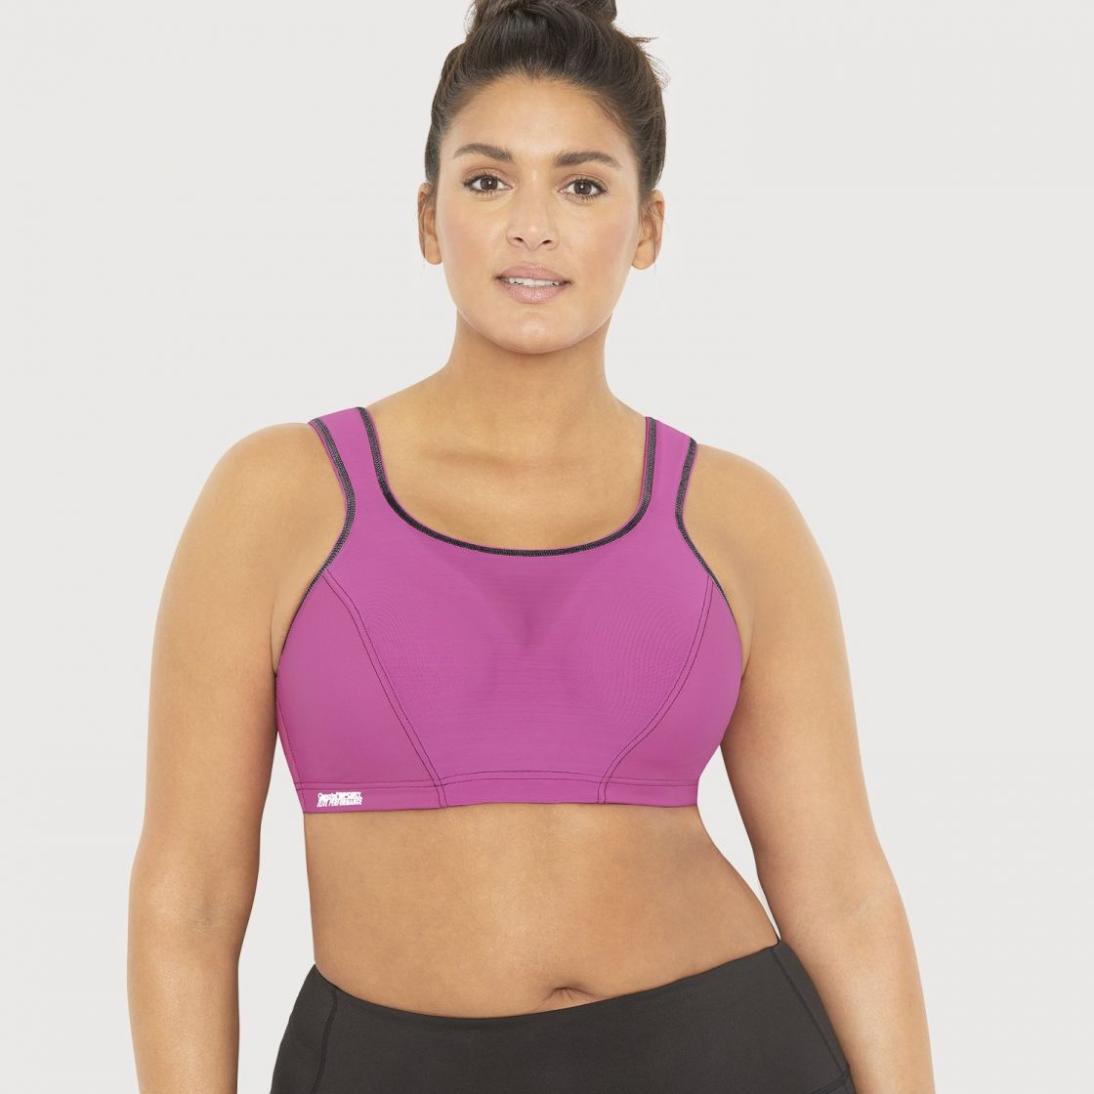 What Are Some Affordable Options For Sports Bras?